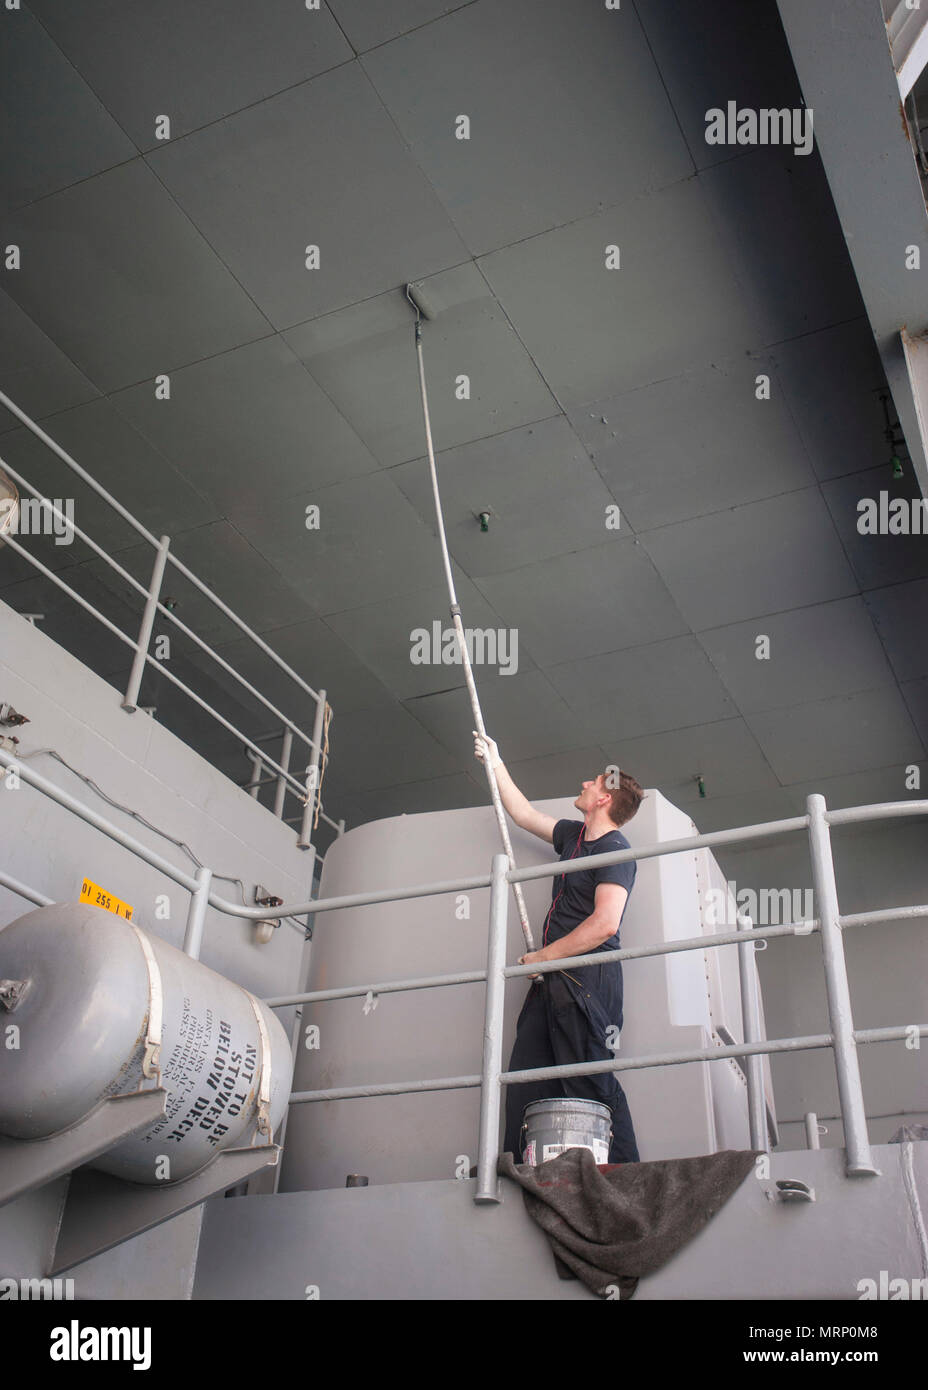 170626-N-ME396-266 MEDITERRANEAN SEA (June 26, 2017) Seaman Robert Mucka repaints the overhead on the fantail of the aircraft carrier USS George H.W. Bush (CVN 77) (GHWB). GHWB, part of the George H.W. Bush Carrier Strike Group (GHWBCSG), is conducting naval operations in the U.S. 6th Fleet area of operations in support of U.S. national security interests in Europe and Africa. (U.S. Navy photo by Mass Communication Specialist 3rd Class Tristan B. Lotz/Released) Stock Photo